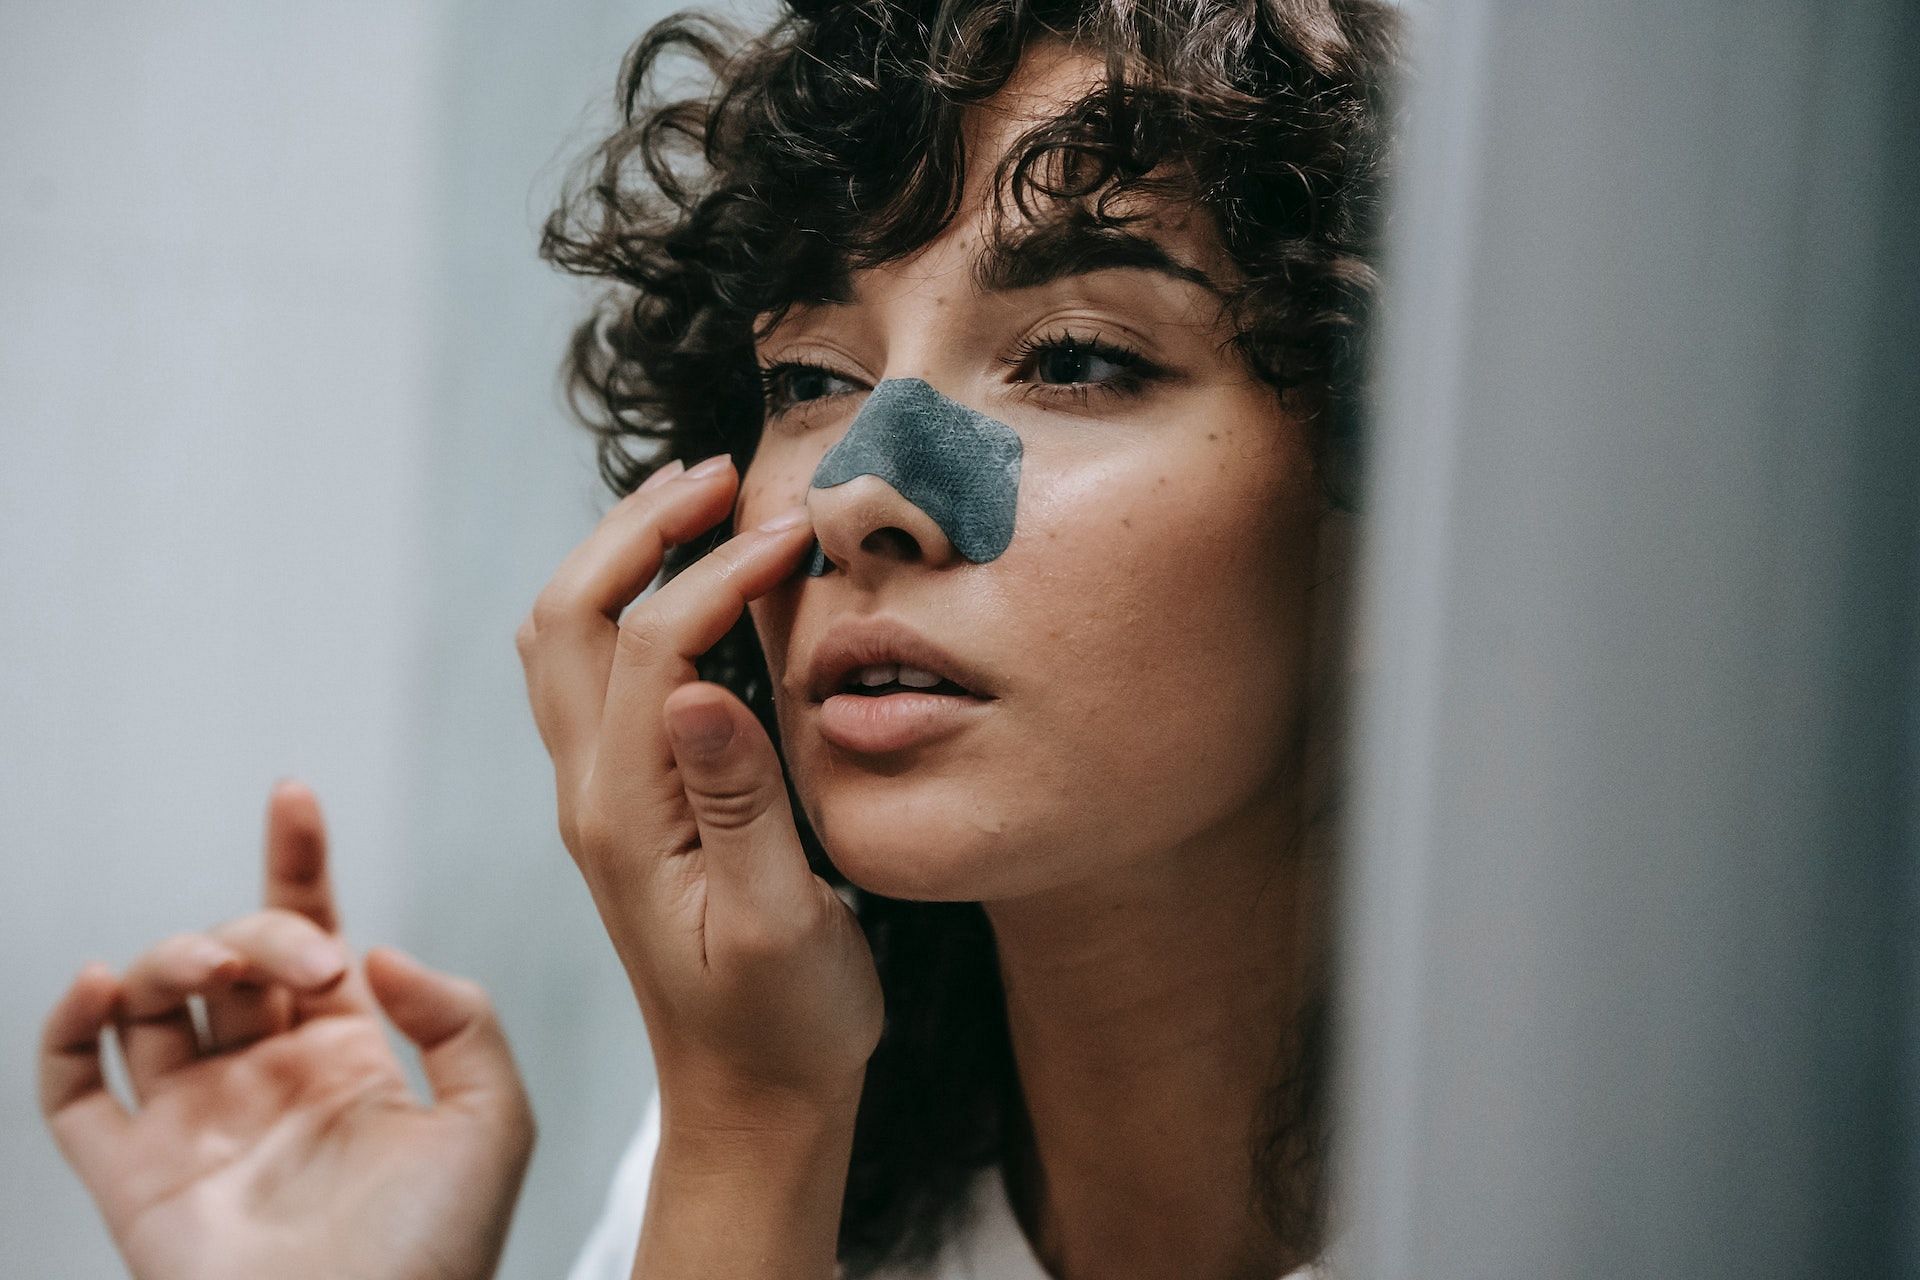 What is the best remedy for blackheads? (Photo via Pexels/Sam Lion)